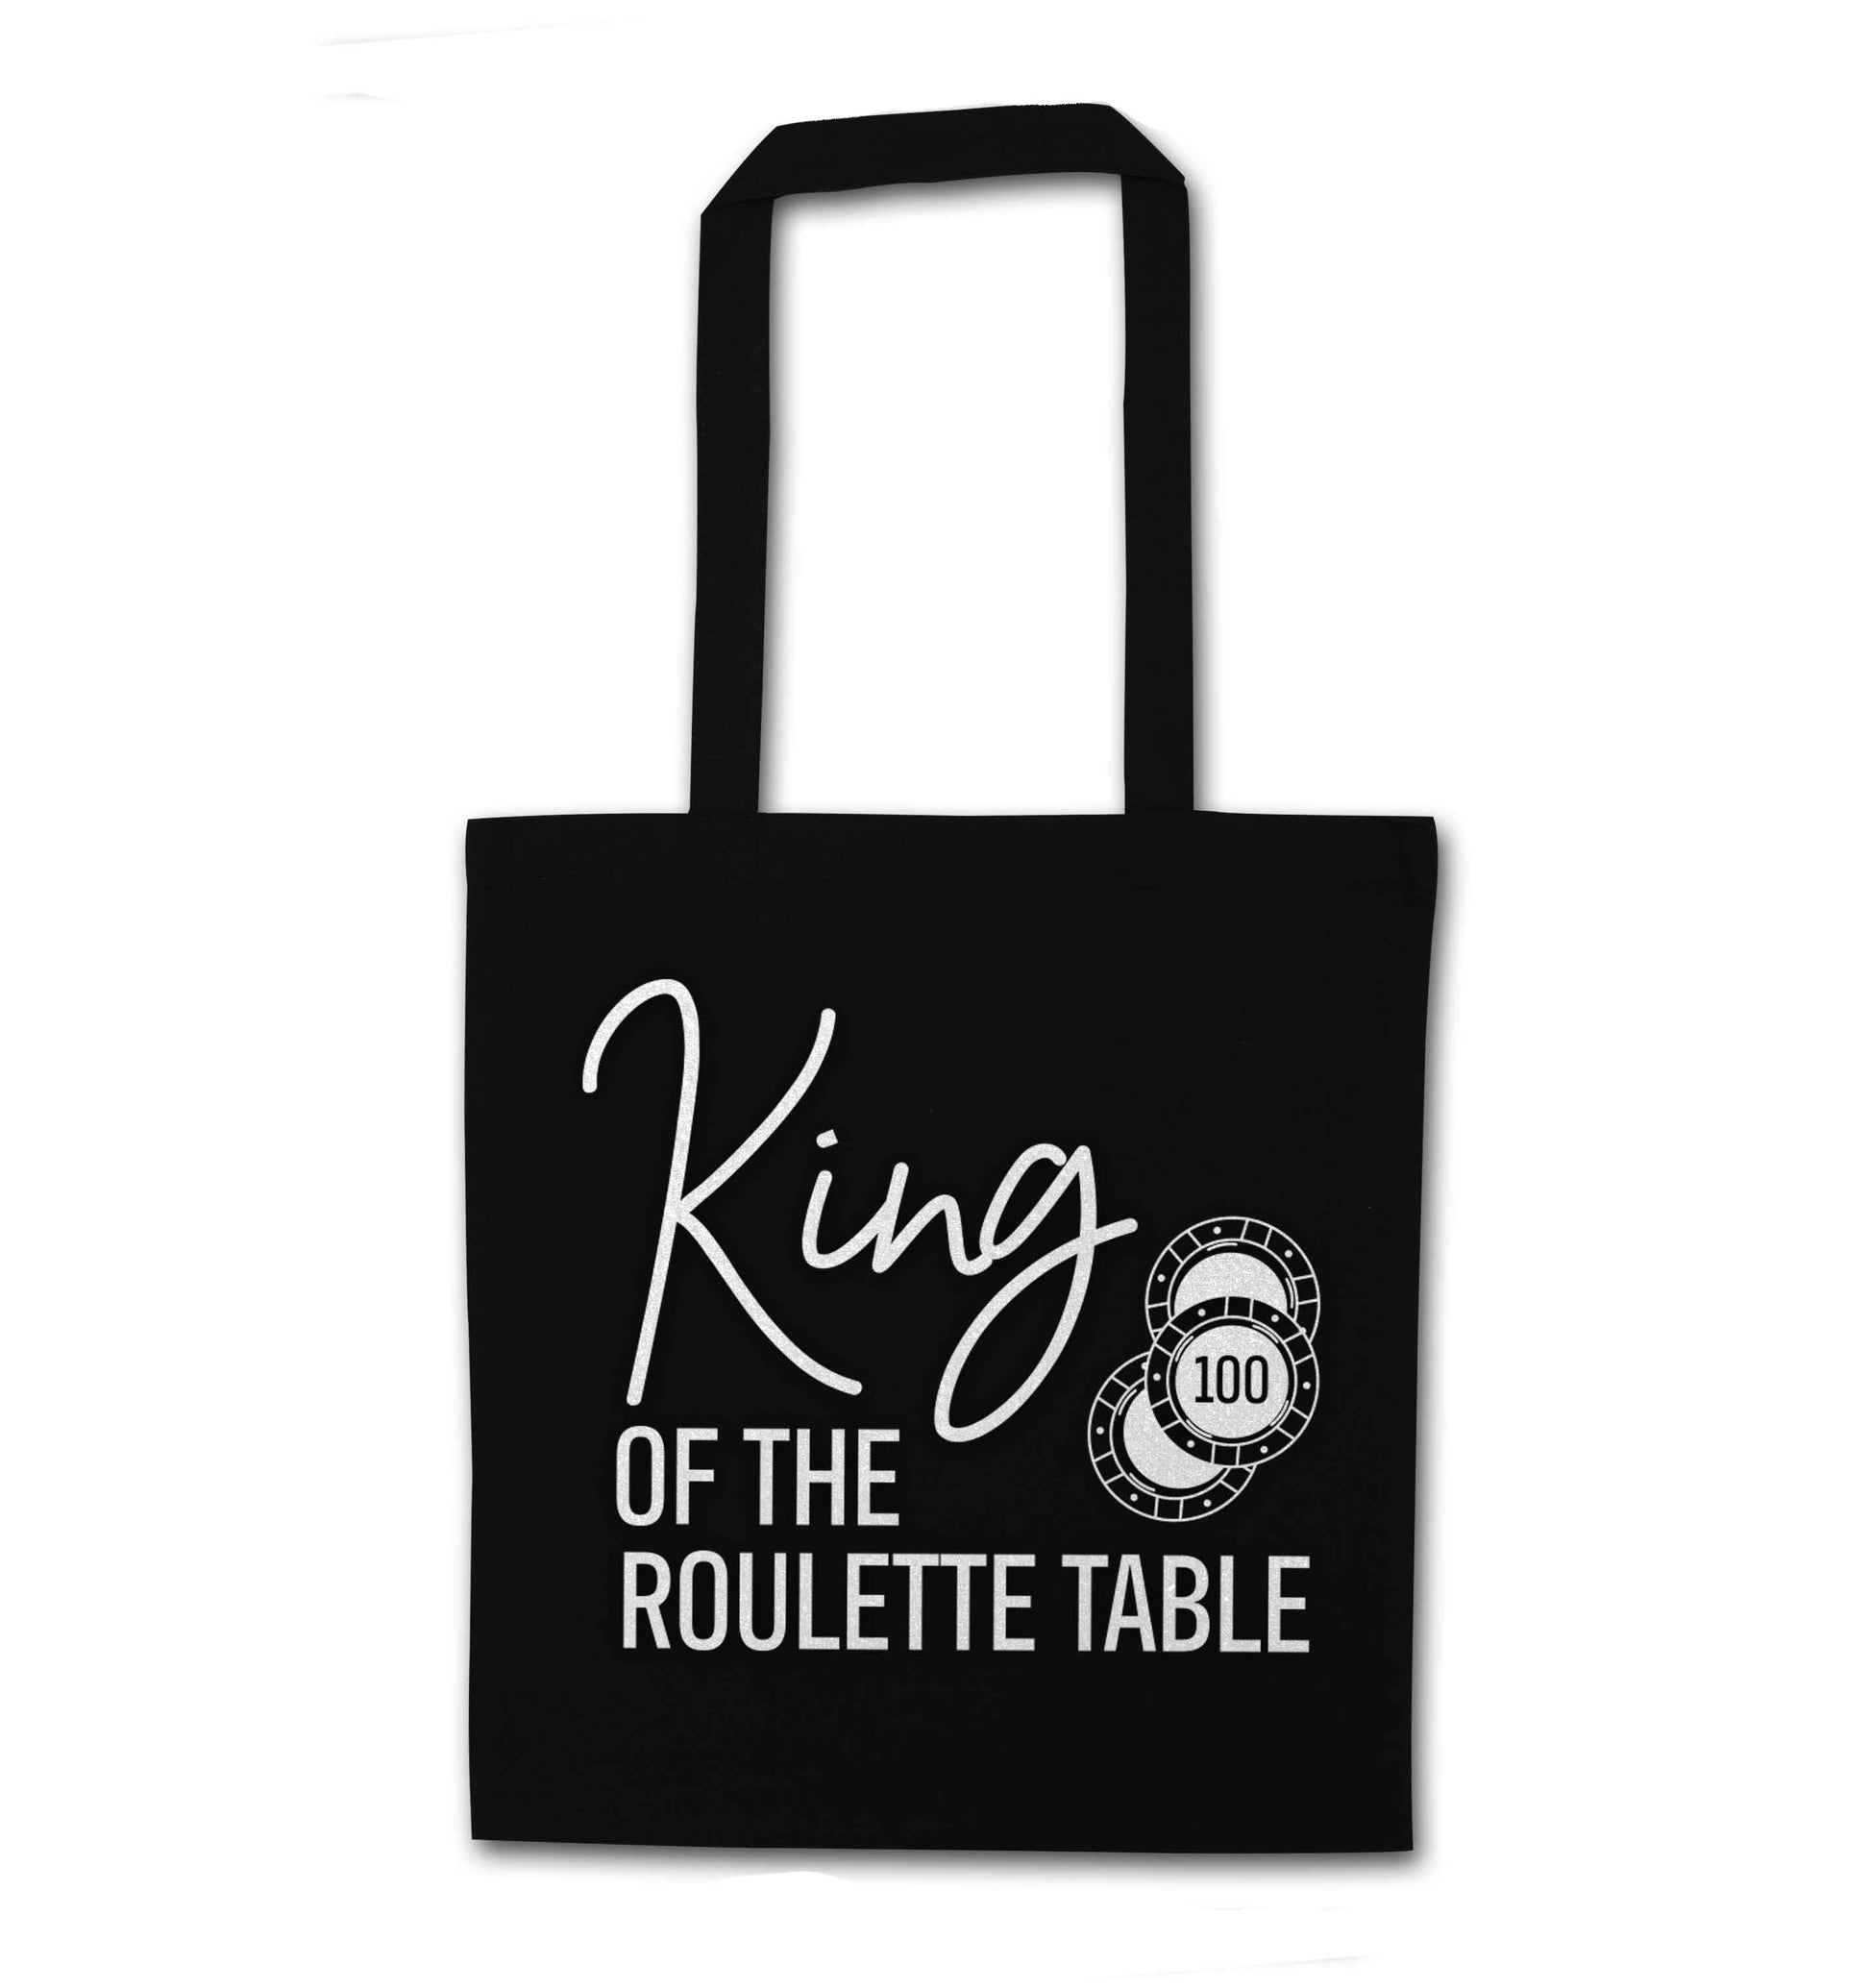 King of the roulette table black tote bag